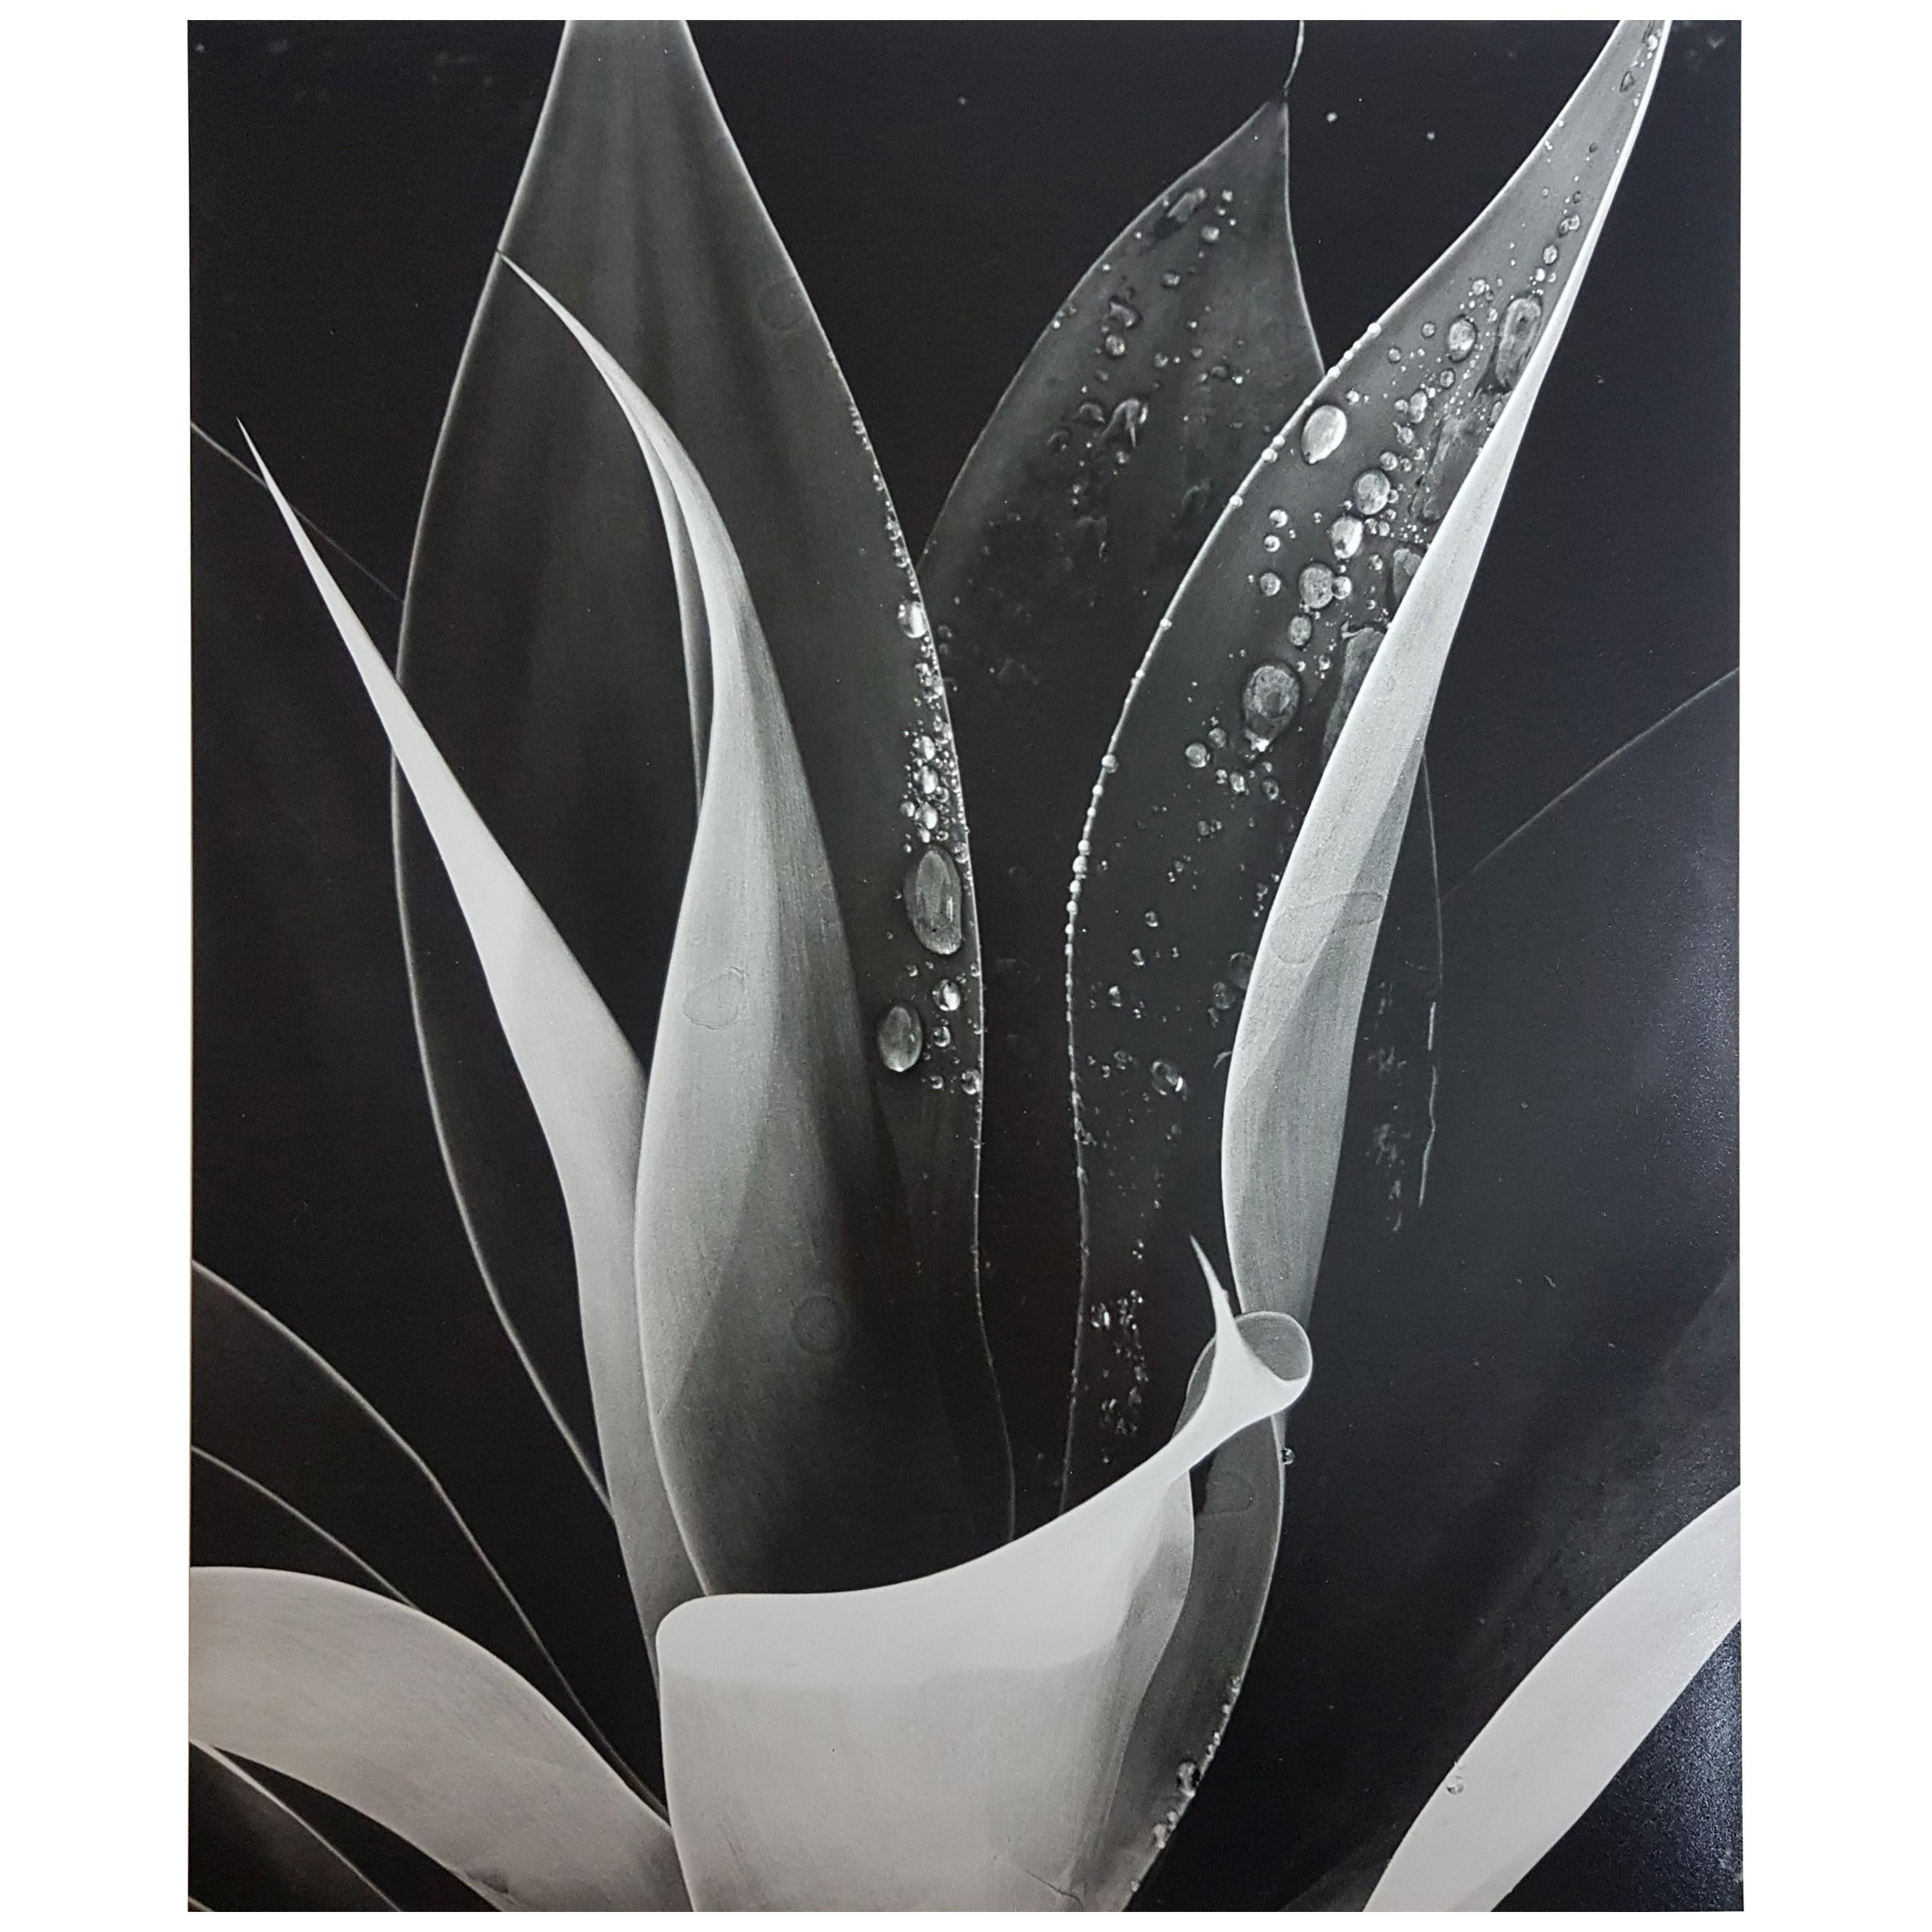 Brett Weston, Untitled 'Agave Plant with Dew', Photograph